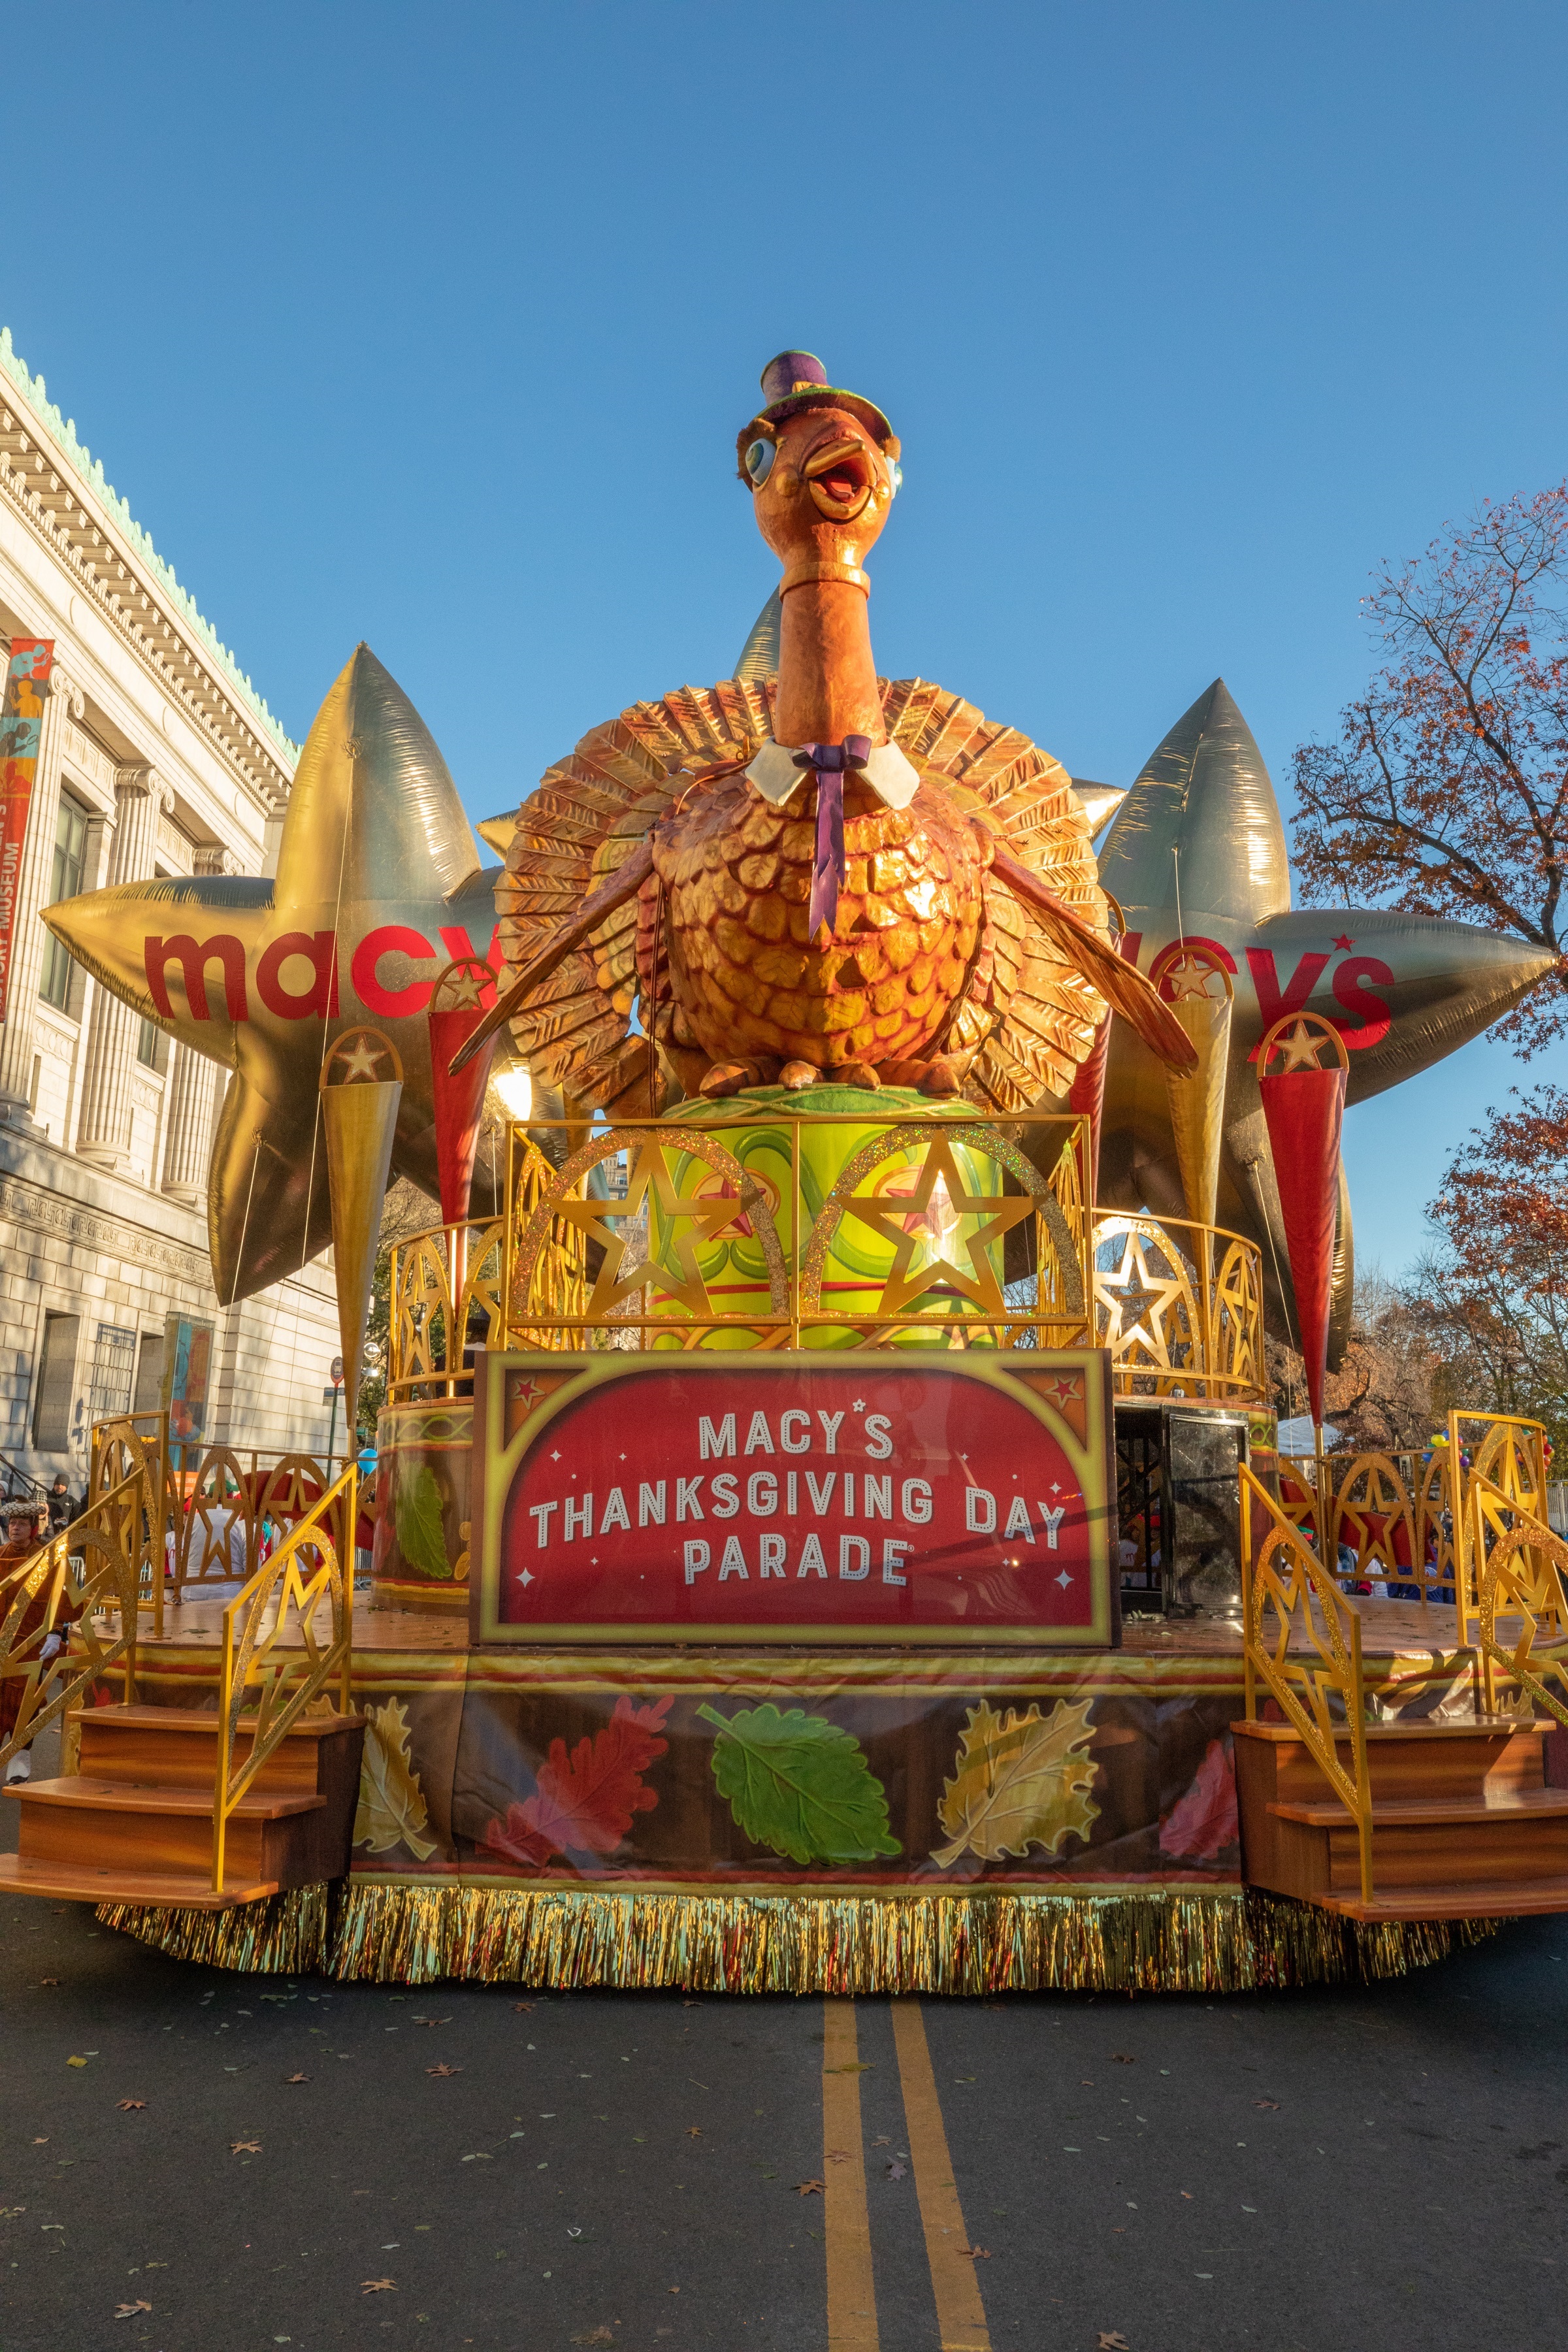 Ram Trucks Lead Parade Floats at 93rd Annual Macy’s Thanksgiving Day Parade